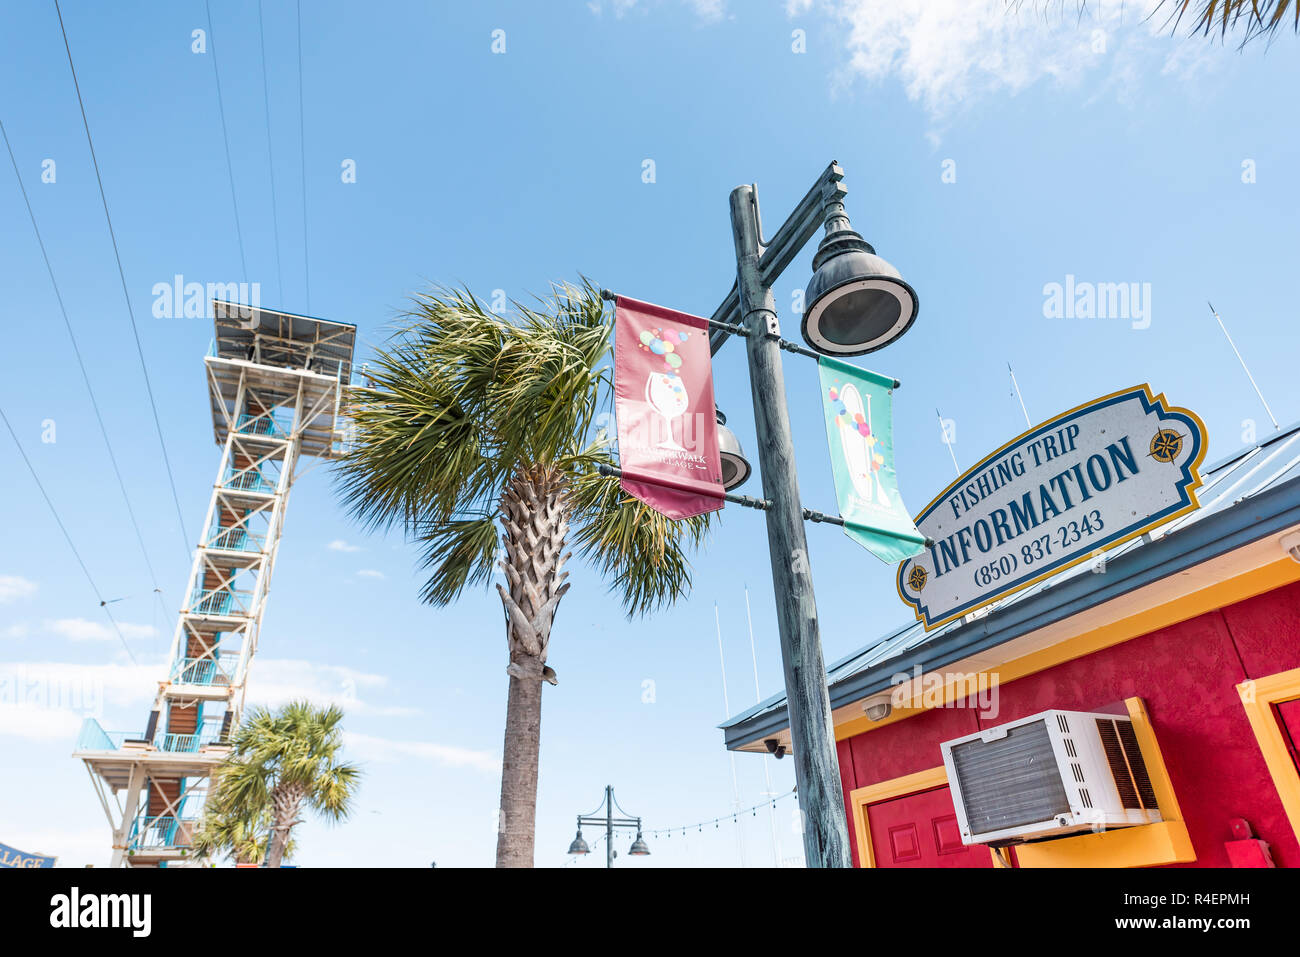 Destin, USA - April 24, 2018: City town Harborwalk village sign by Harbor Boardwalk during sunny day in Florida panhandle gulf of mexico, zip line tow Stock Photo